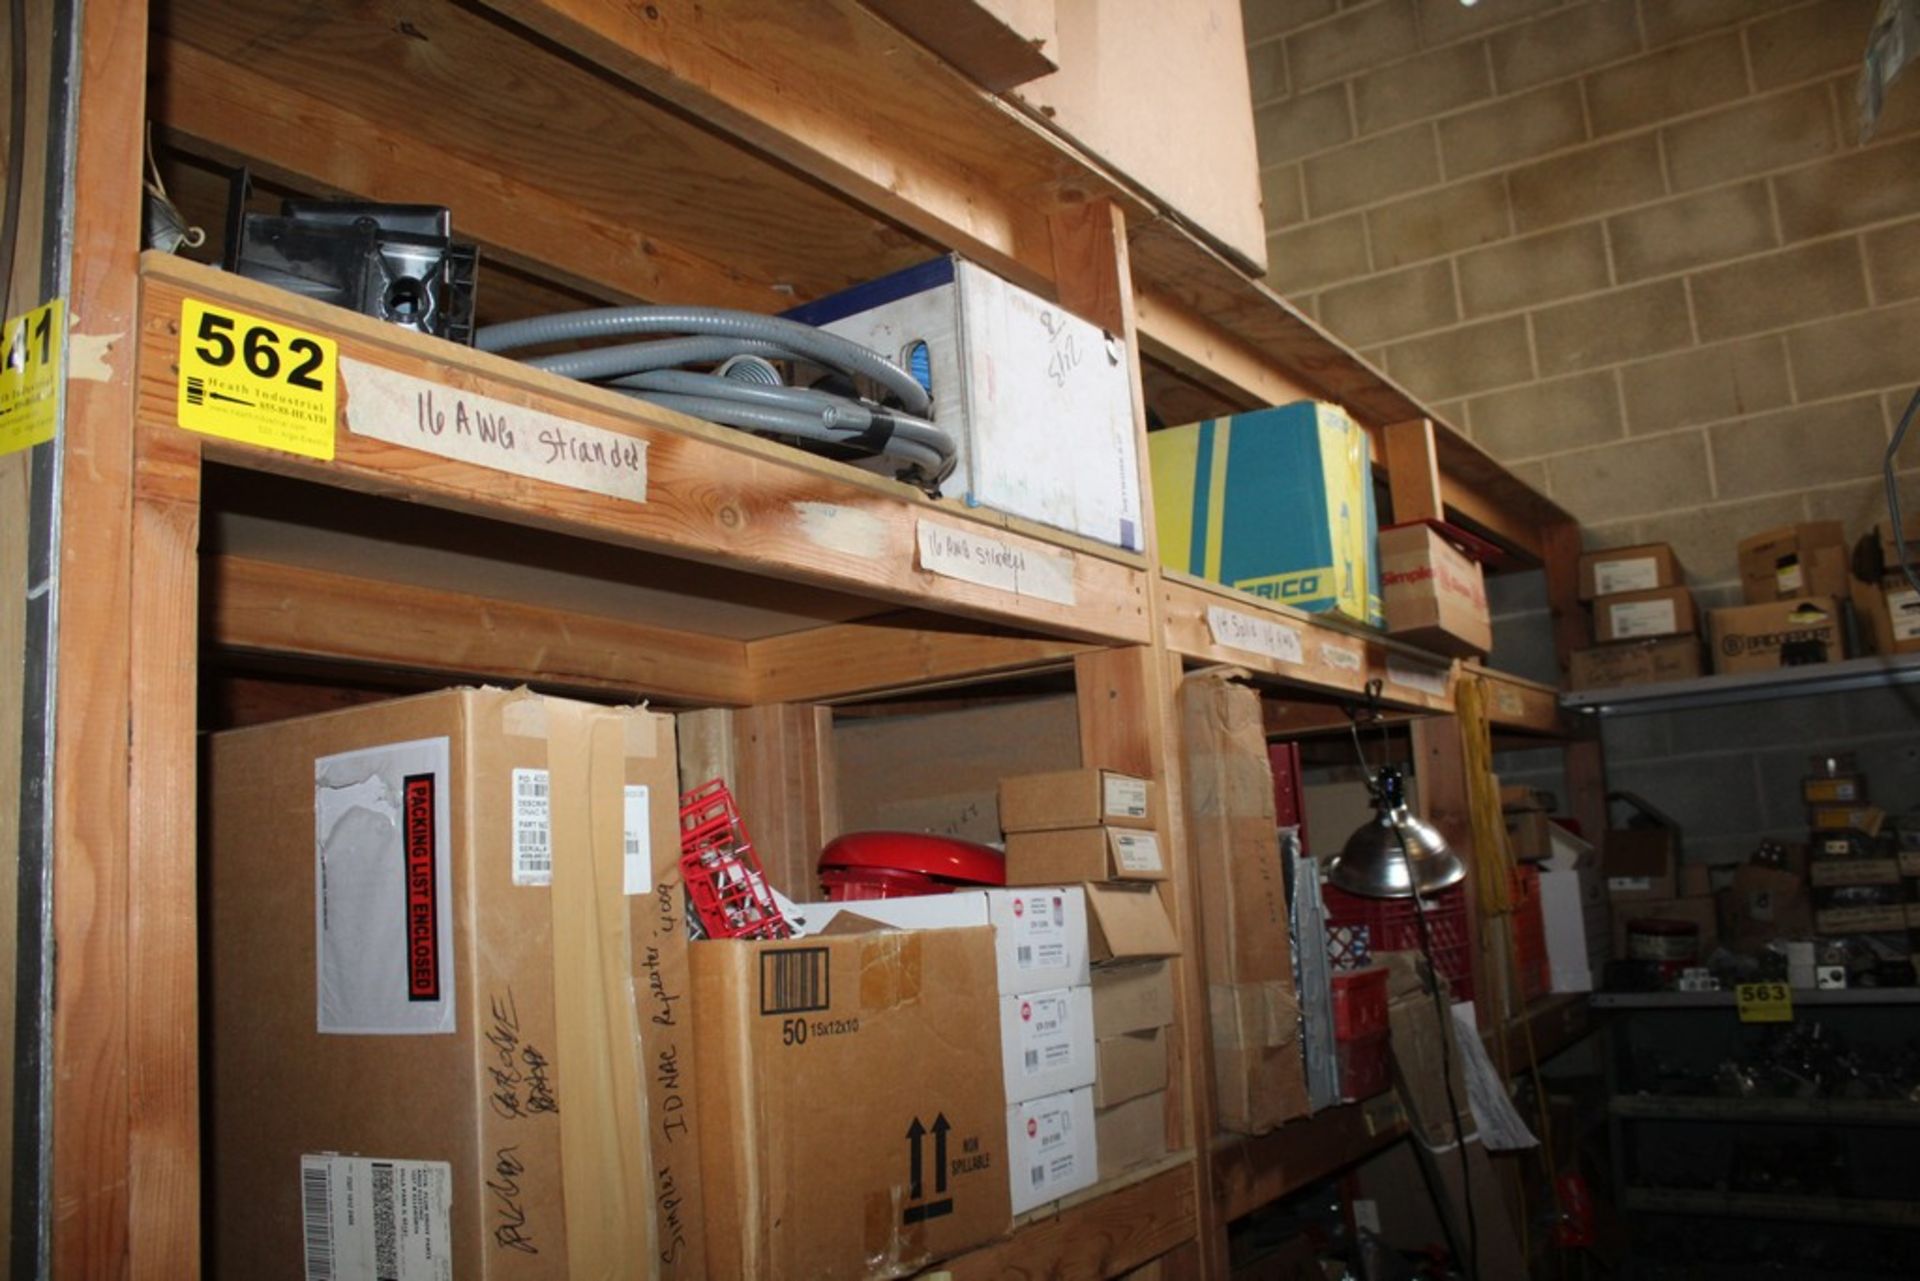 LARGE QUANTITY OF FIRE SAFETY COMPONENTS ON SHELF